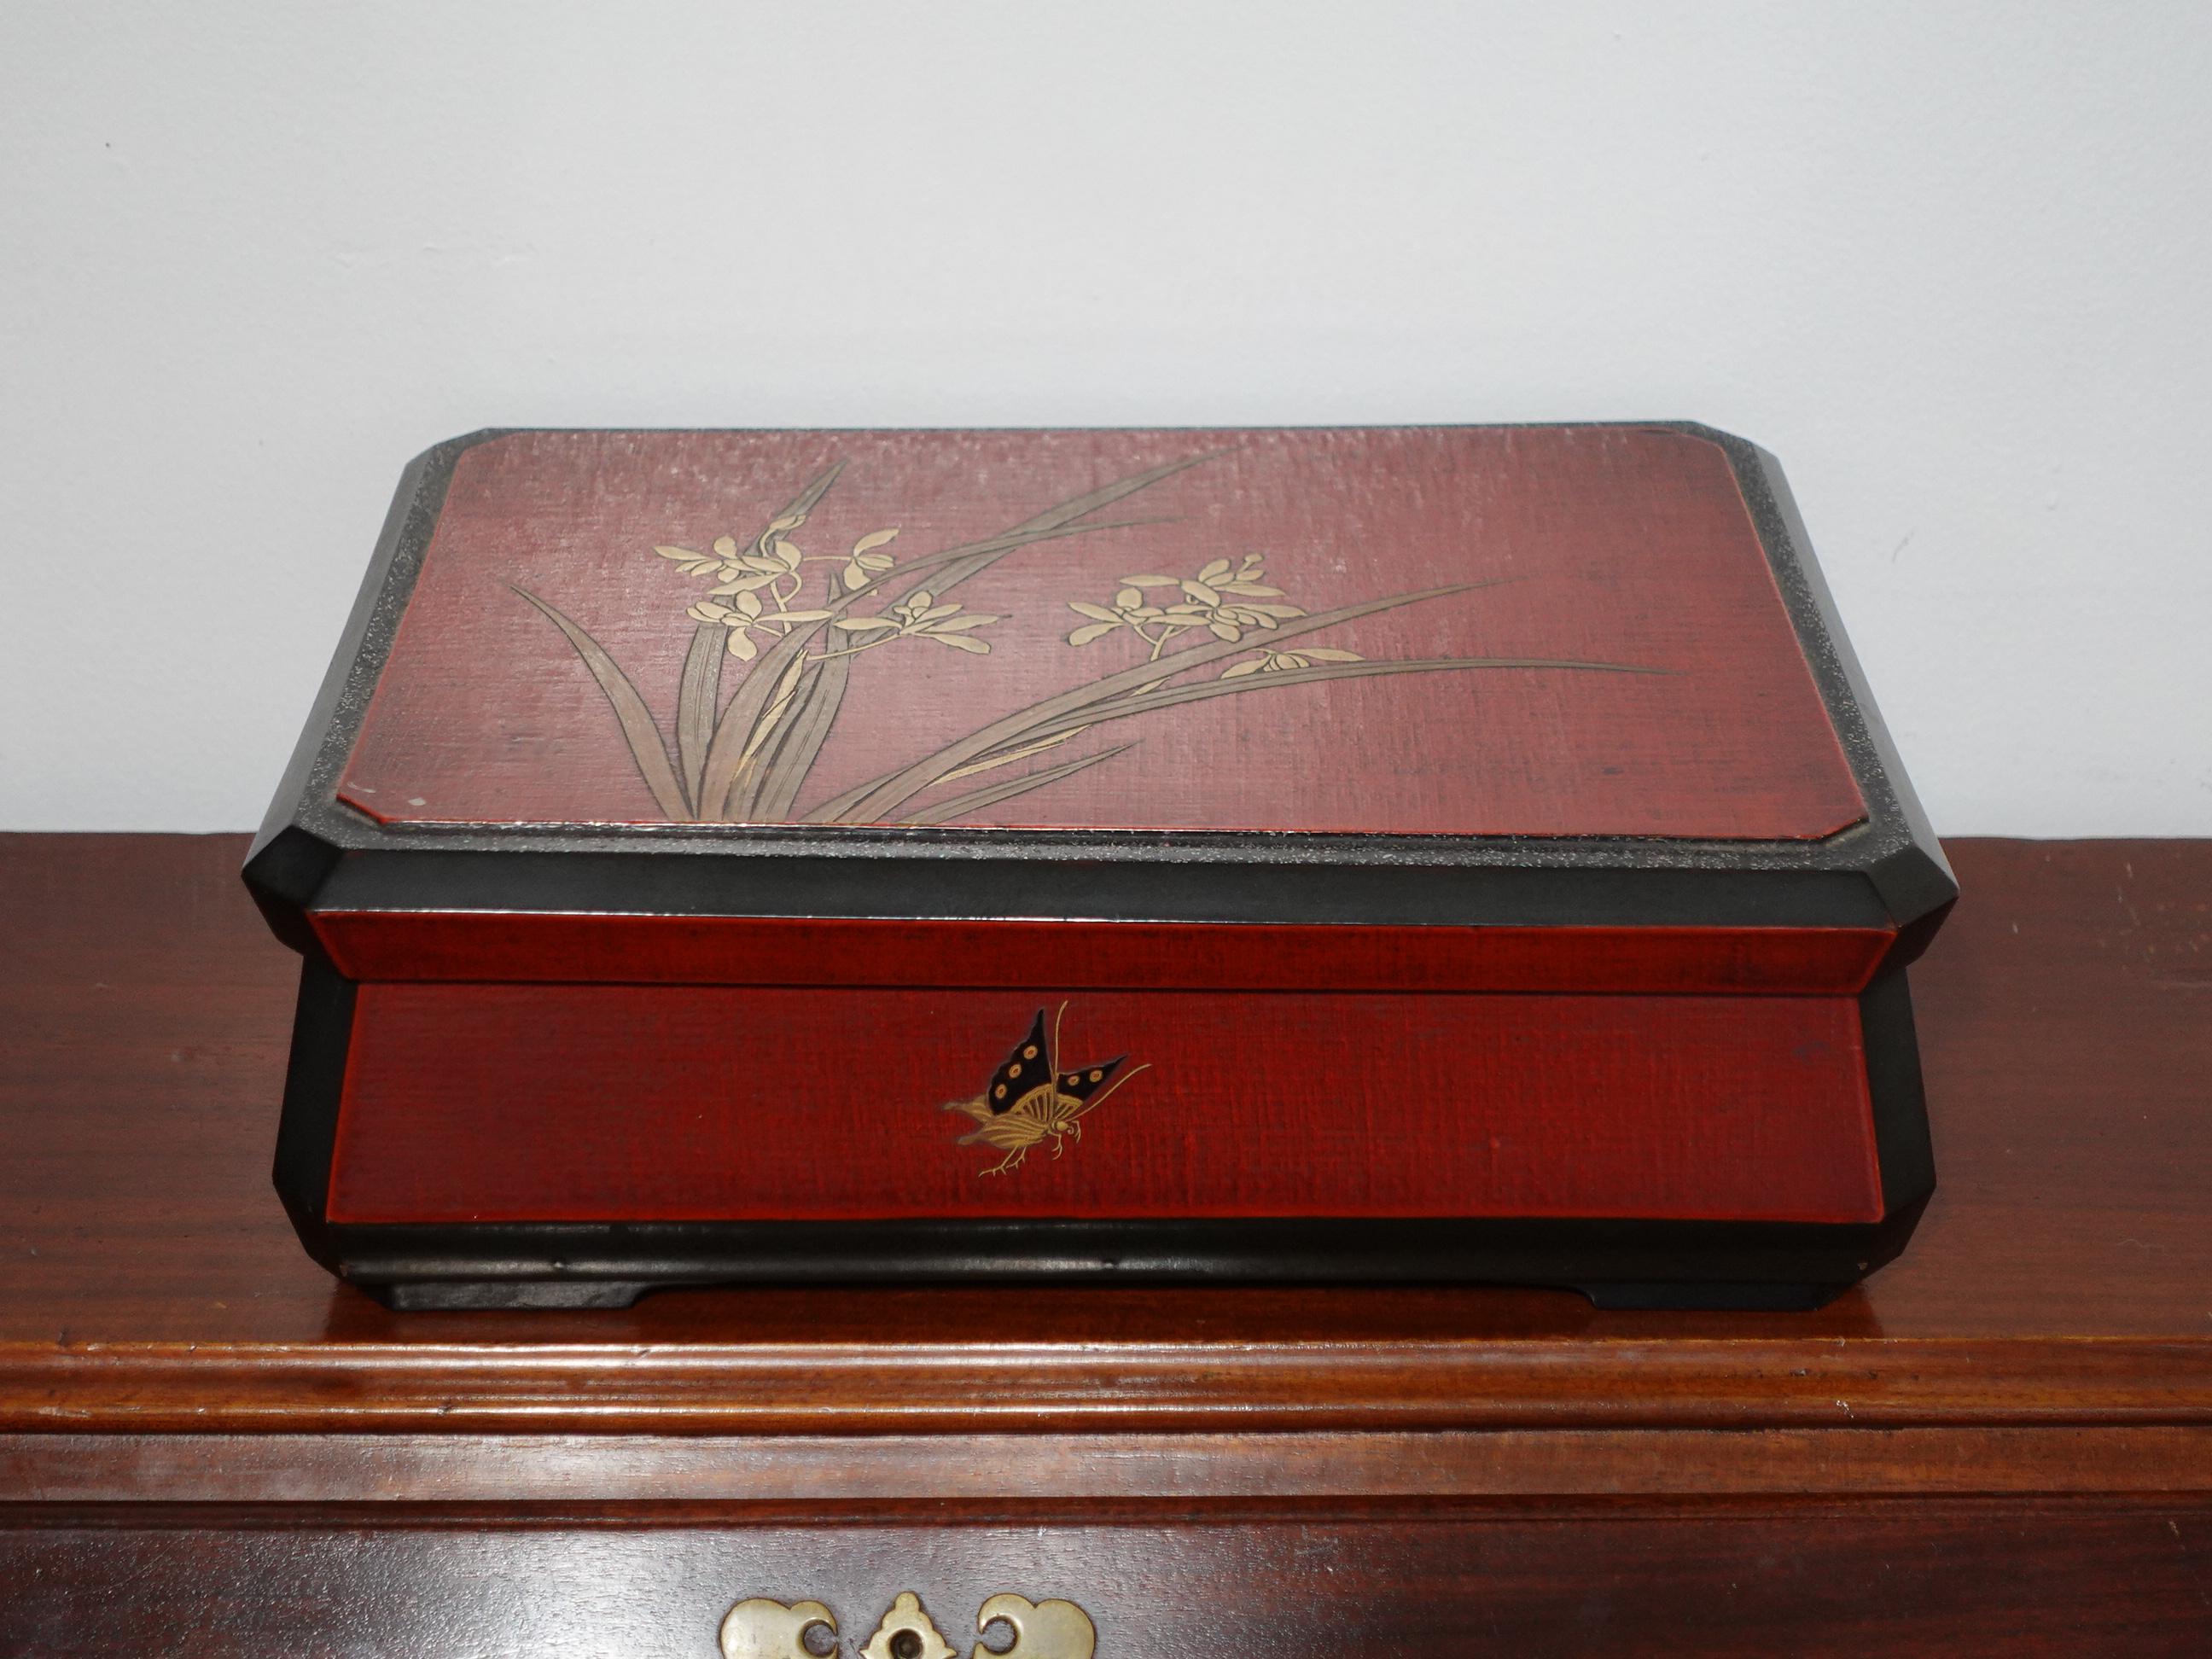 Japanese late Meiji period A Large Organizer Red Lacquered Box, decorated with irises and butterflies in gold and black.